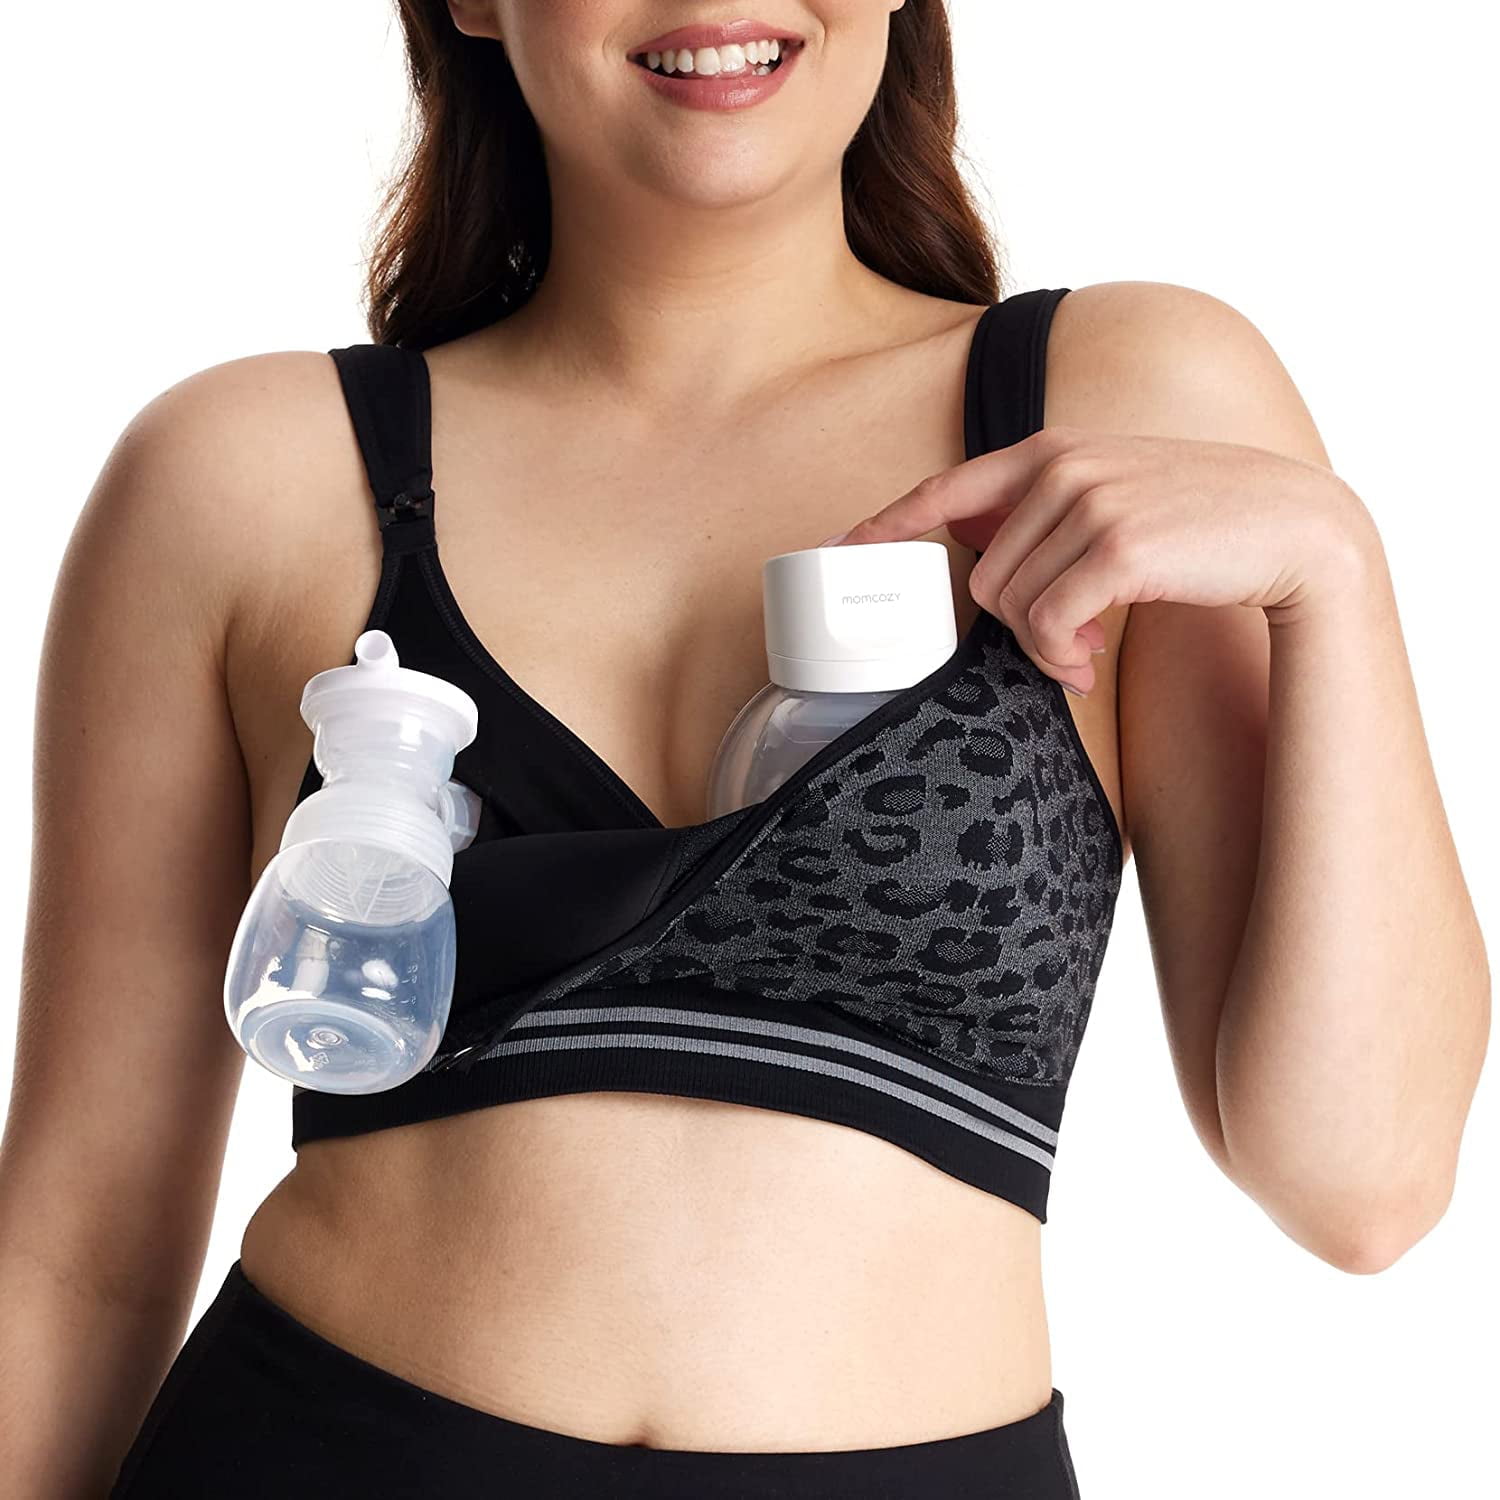 In-Bra Pumping: 5 things you need to know! – Bravado Designs Canada